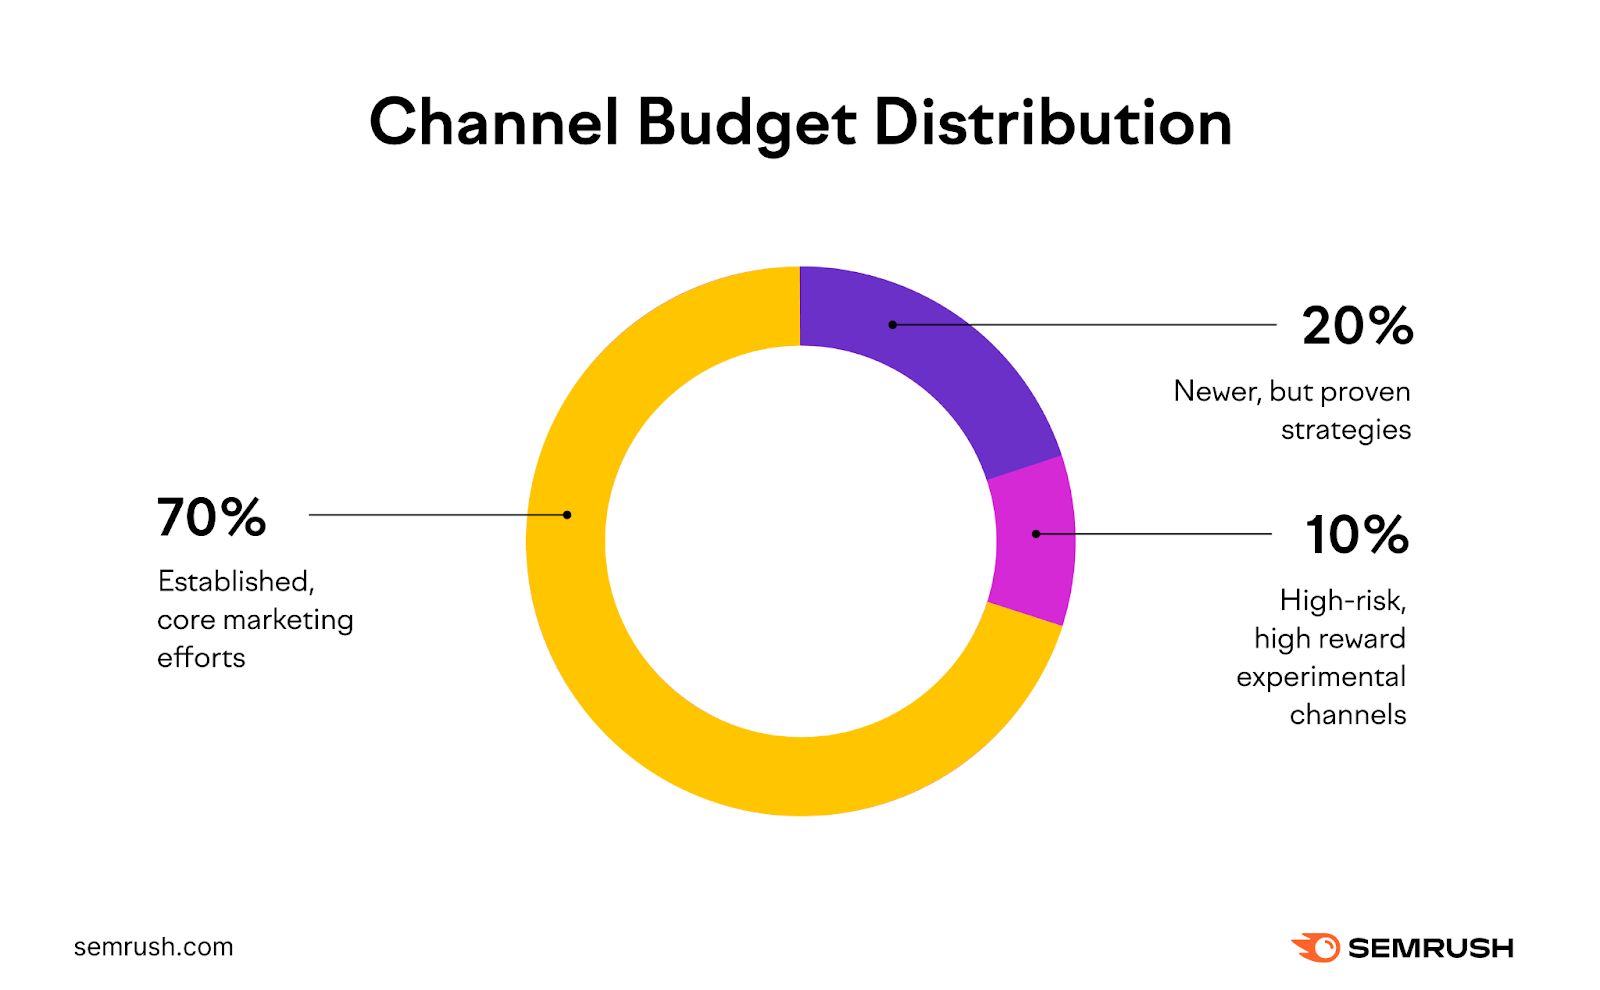 Channel budget distribution visualisation, following the 70-20-10 rule.